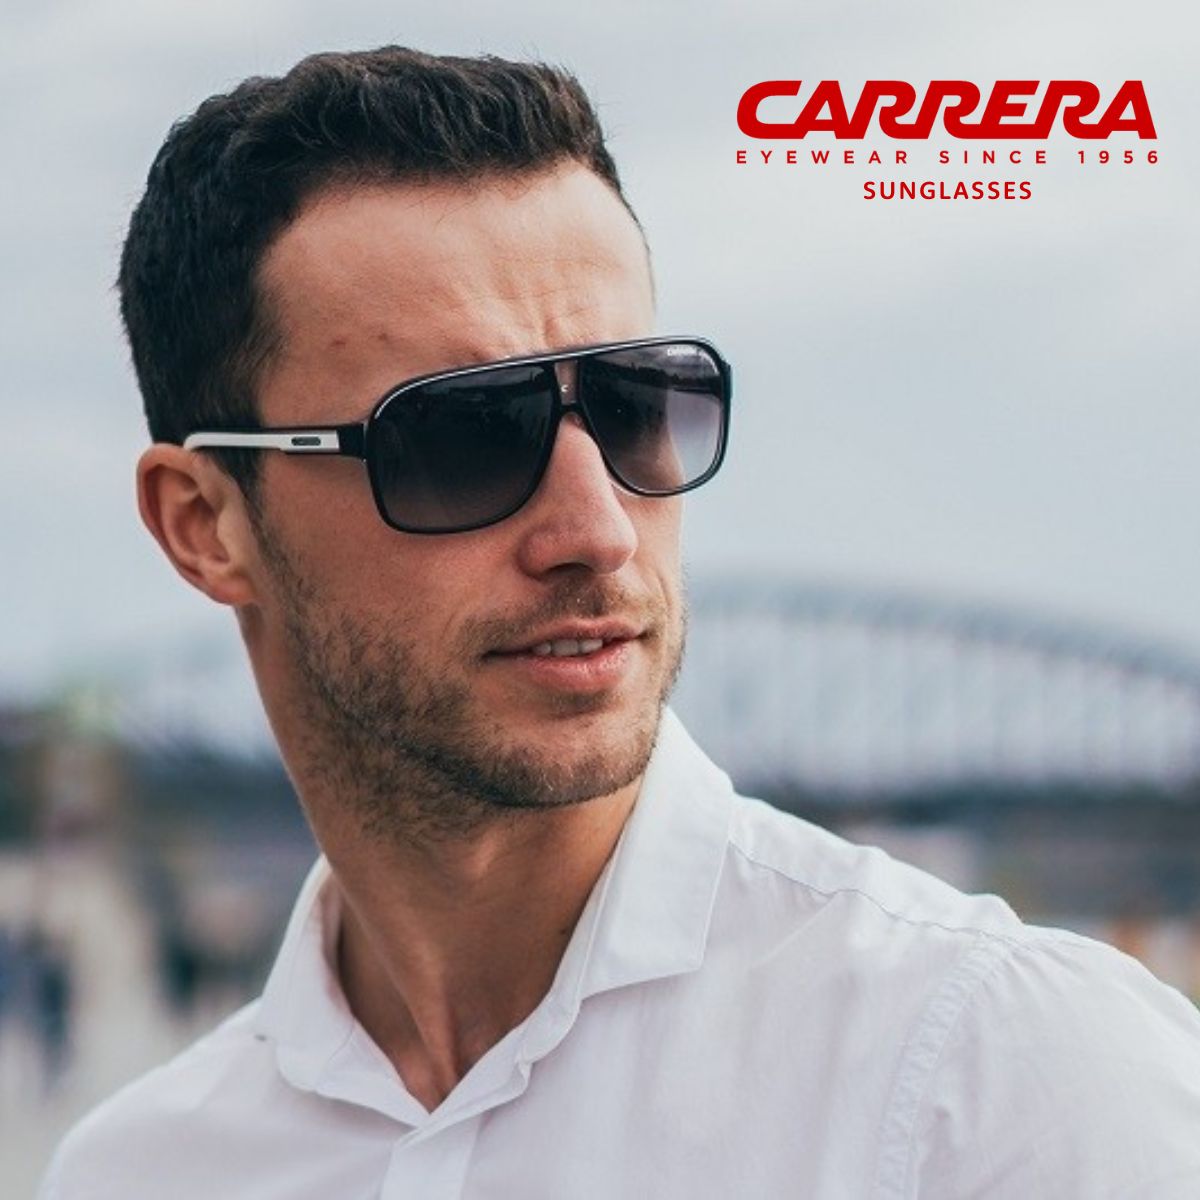 "Various trendy Carrera Sunglasses for men and women, including full rim, half rim, and rimless designs in multiple shades, available at Optorium."